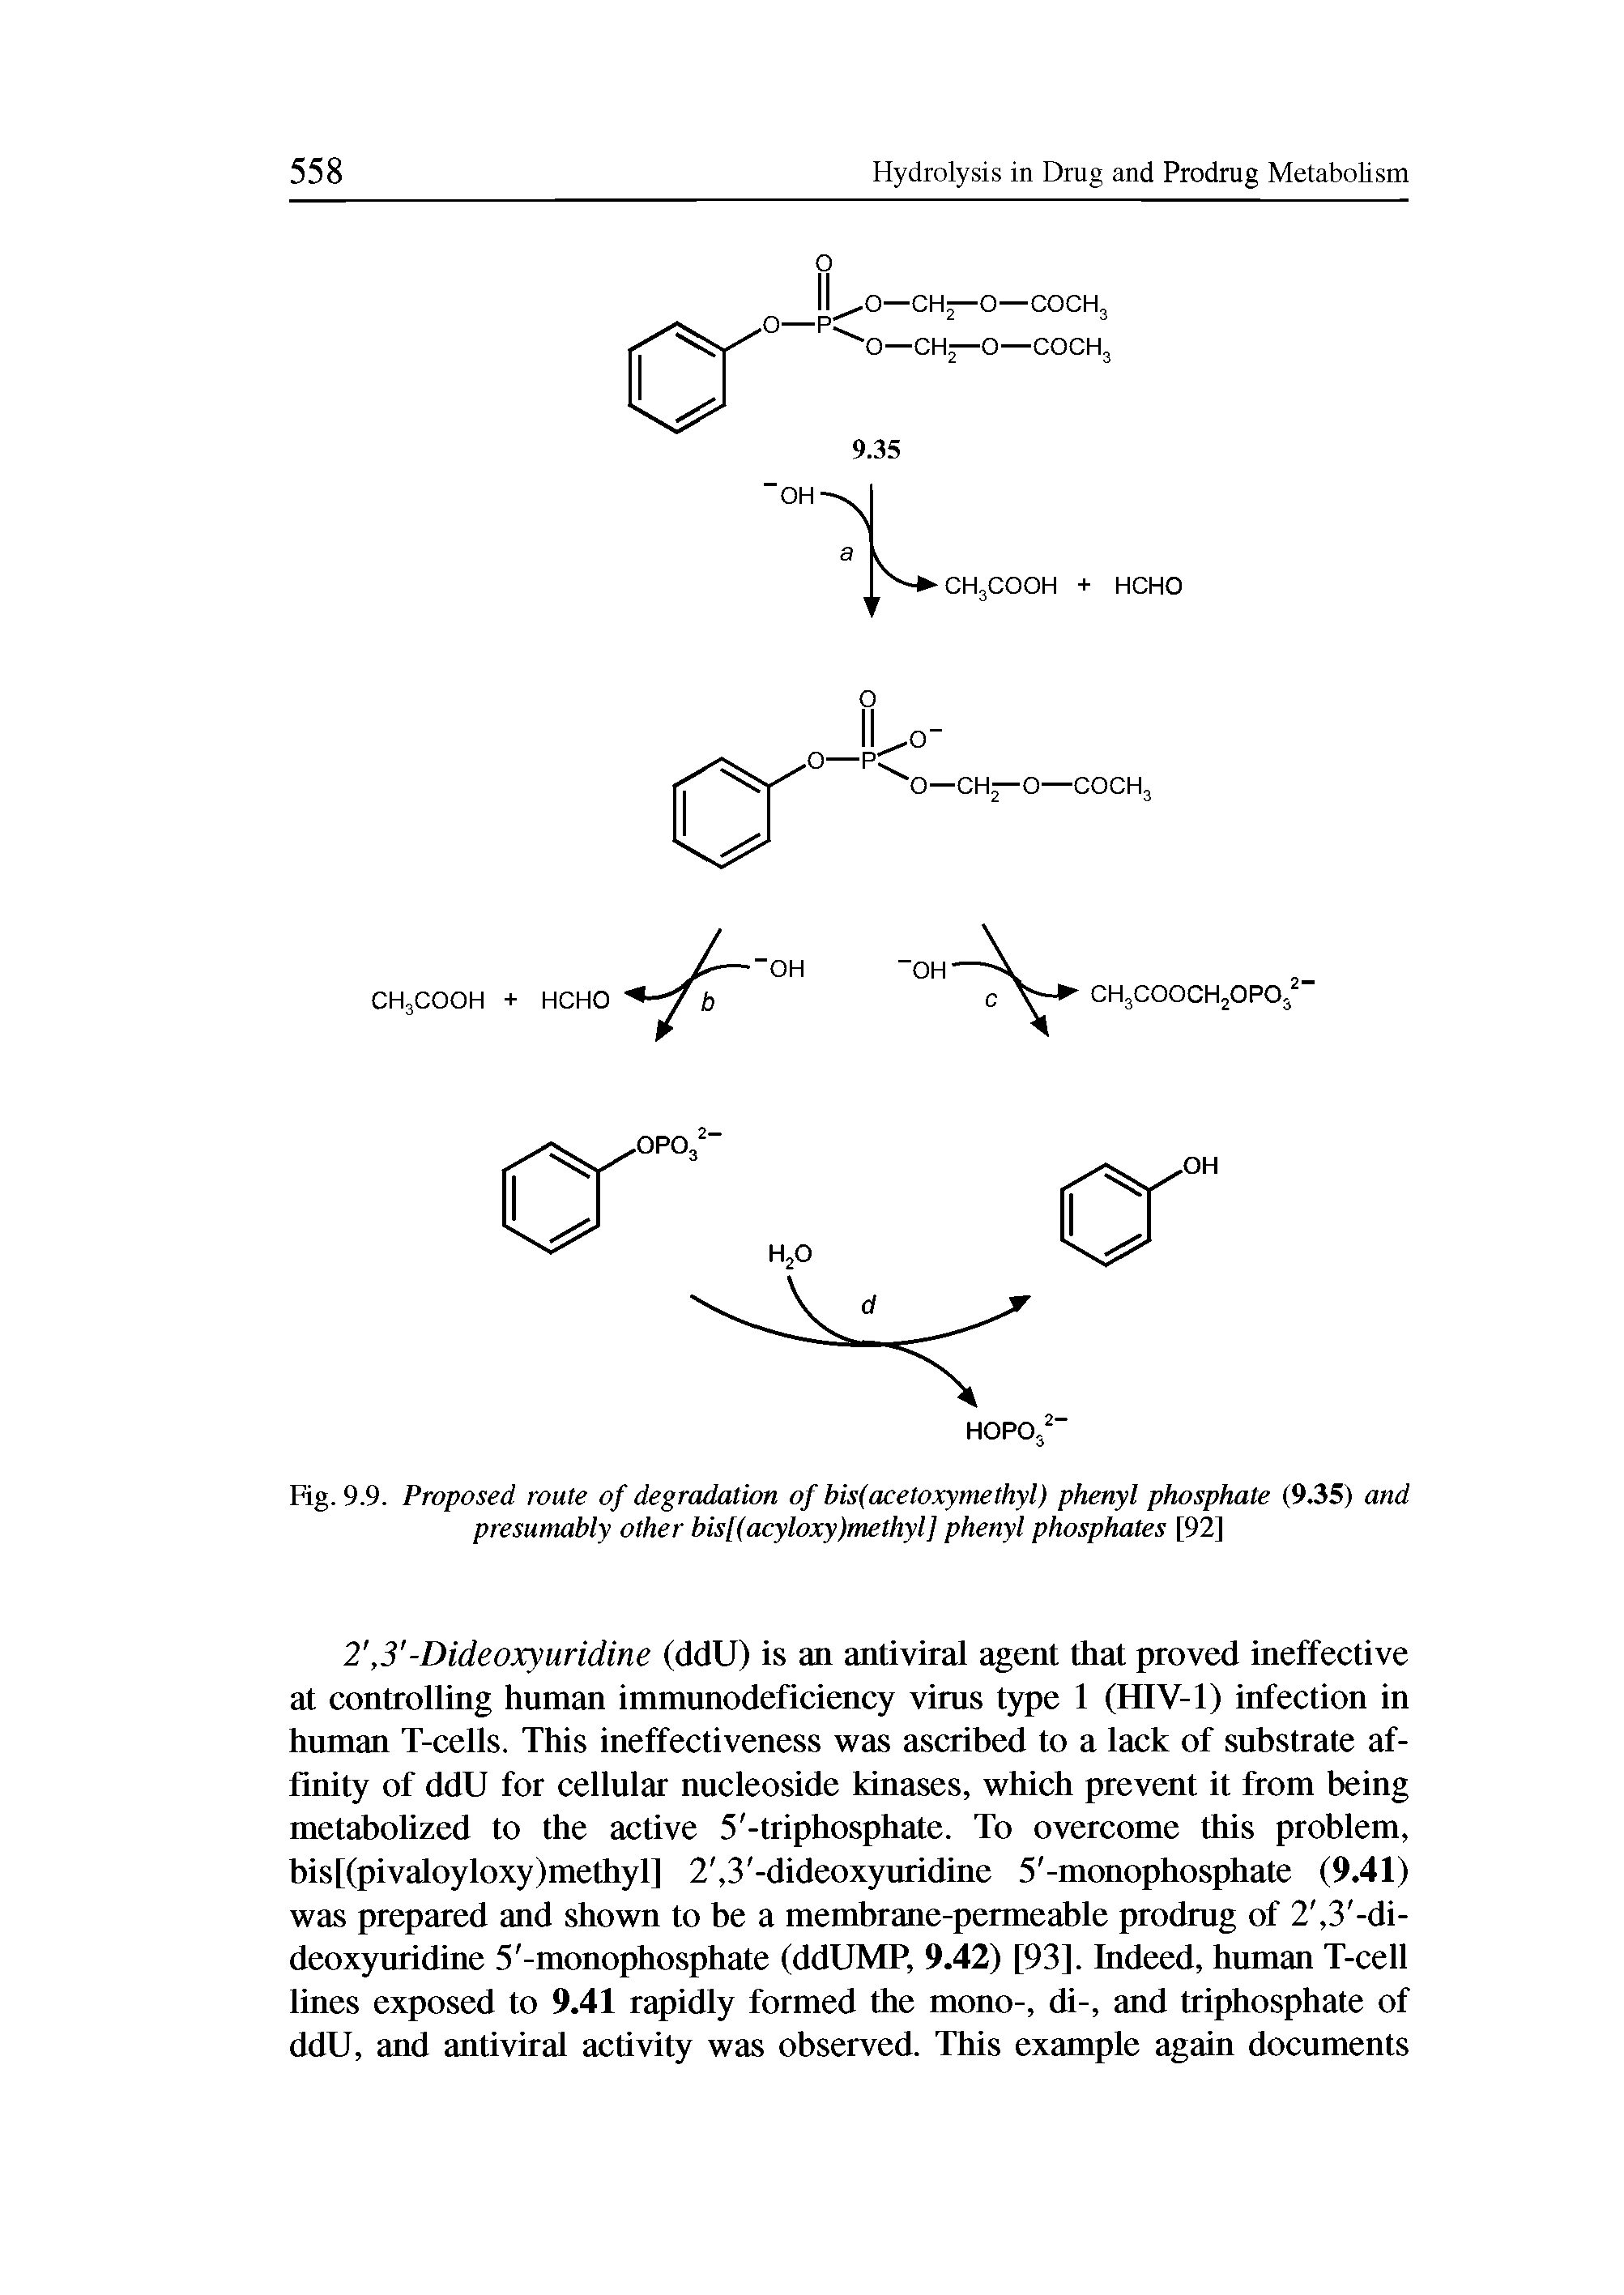 Fig. 9.9. Proposed route of degradation of bis(acetoxymethyl) phenyl phosphate (9.35) and presumably other bis[(acyloxy)methyl] phenyl phosphates [92]...